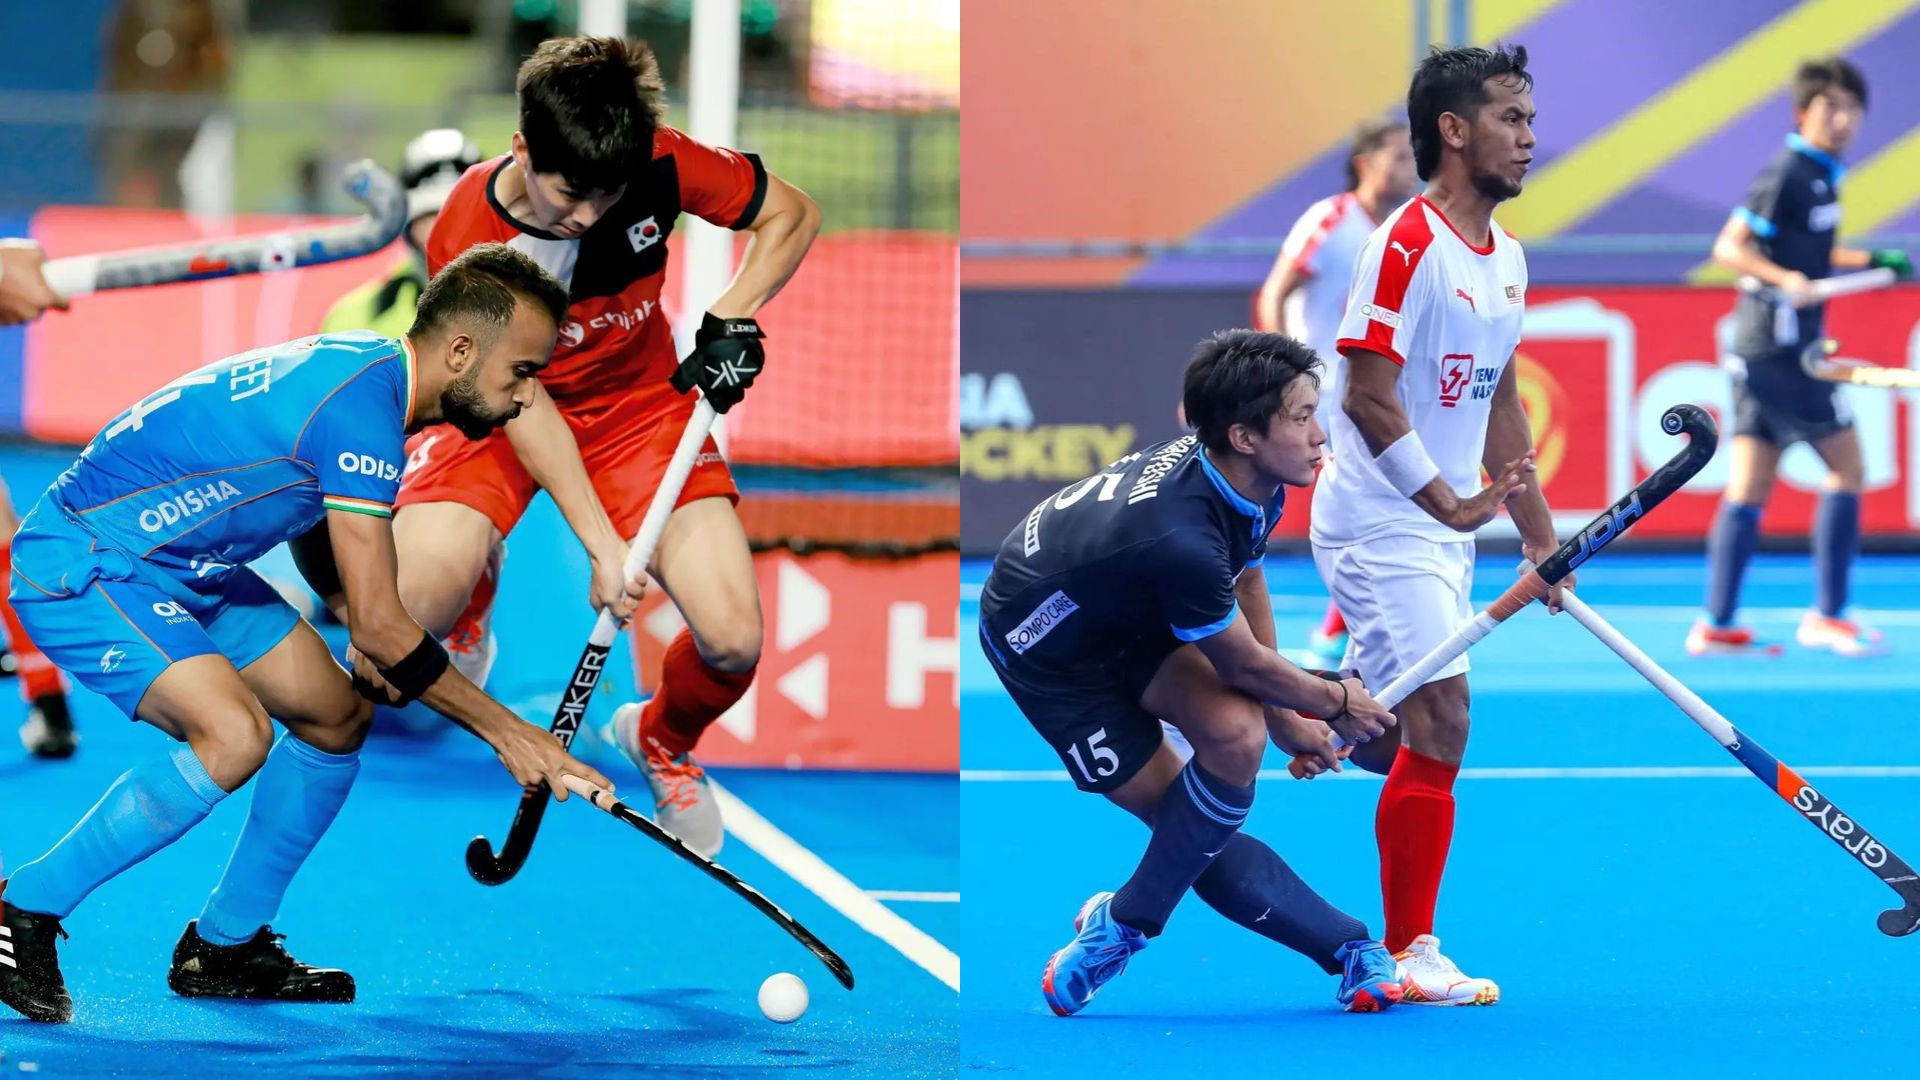 What Is The Prize Money For The Hockey Asian Champions Trophy 2023?